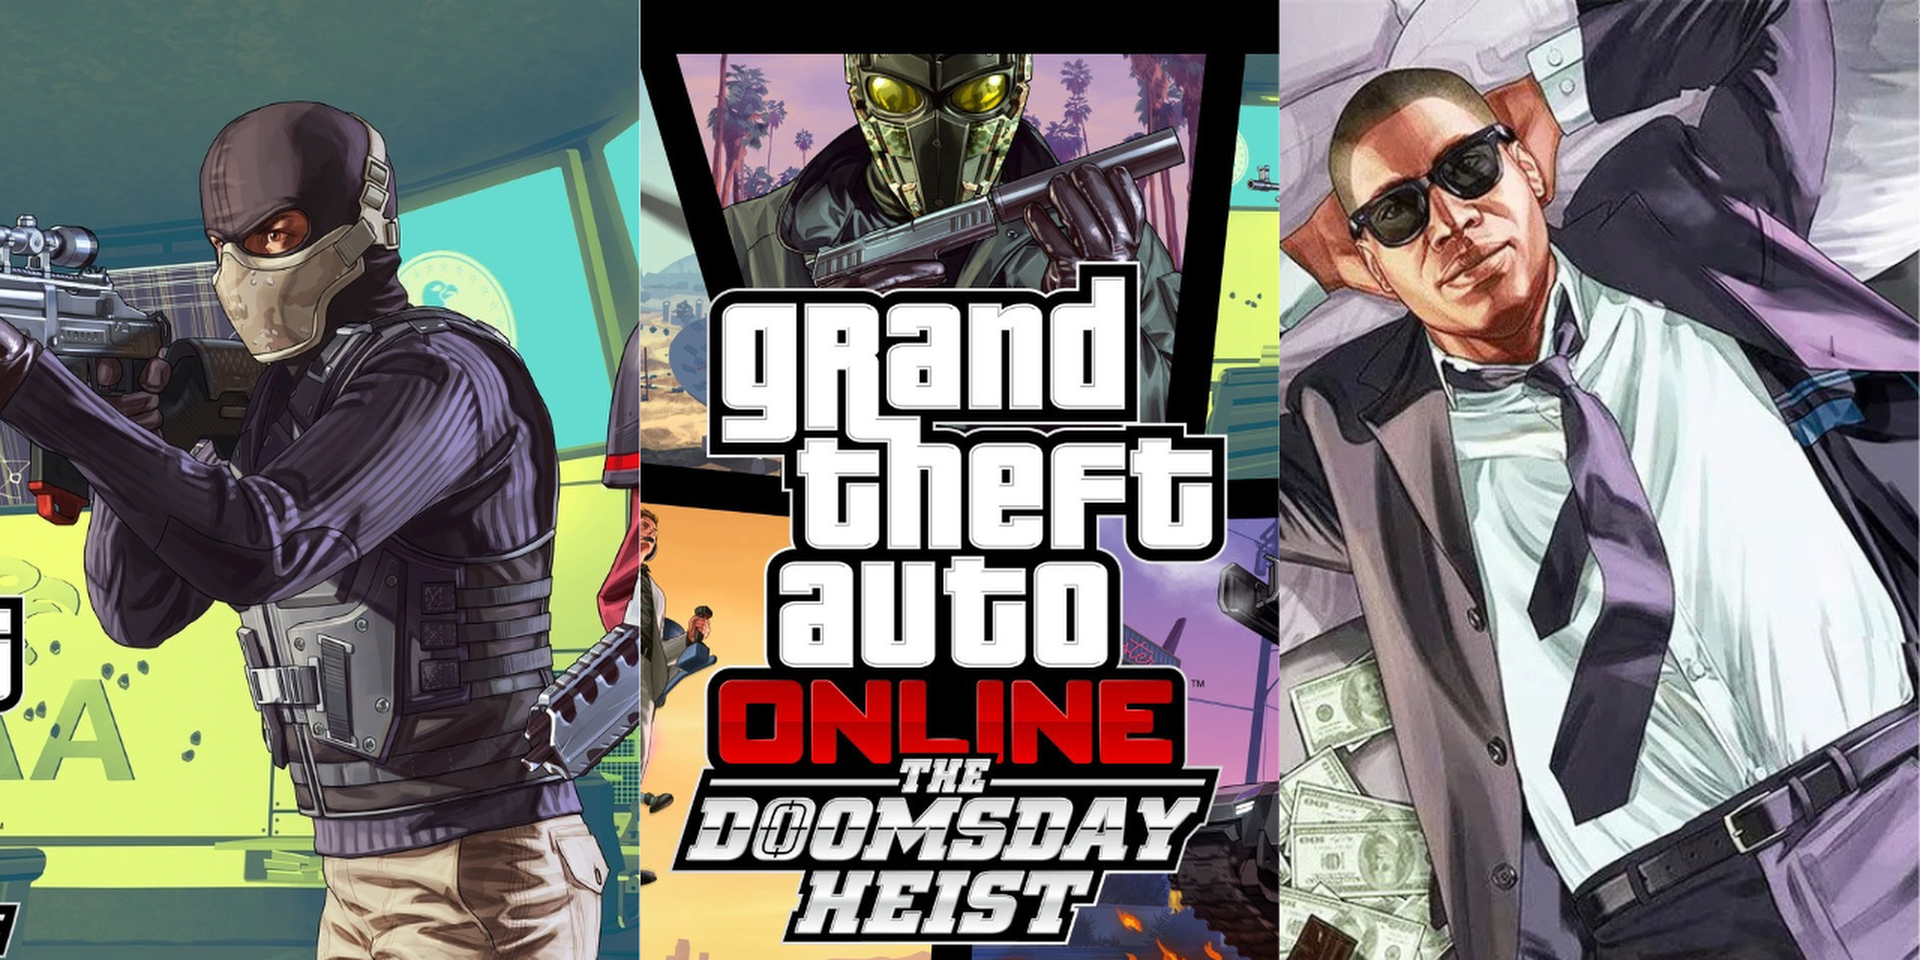 10 Hardest Trophies To Get In Grand Theft Auto V